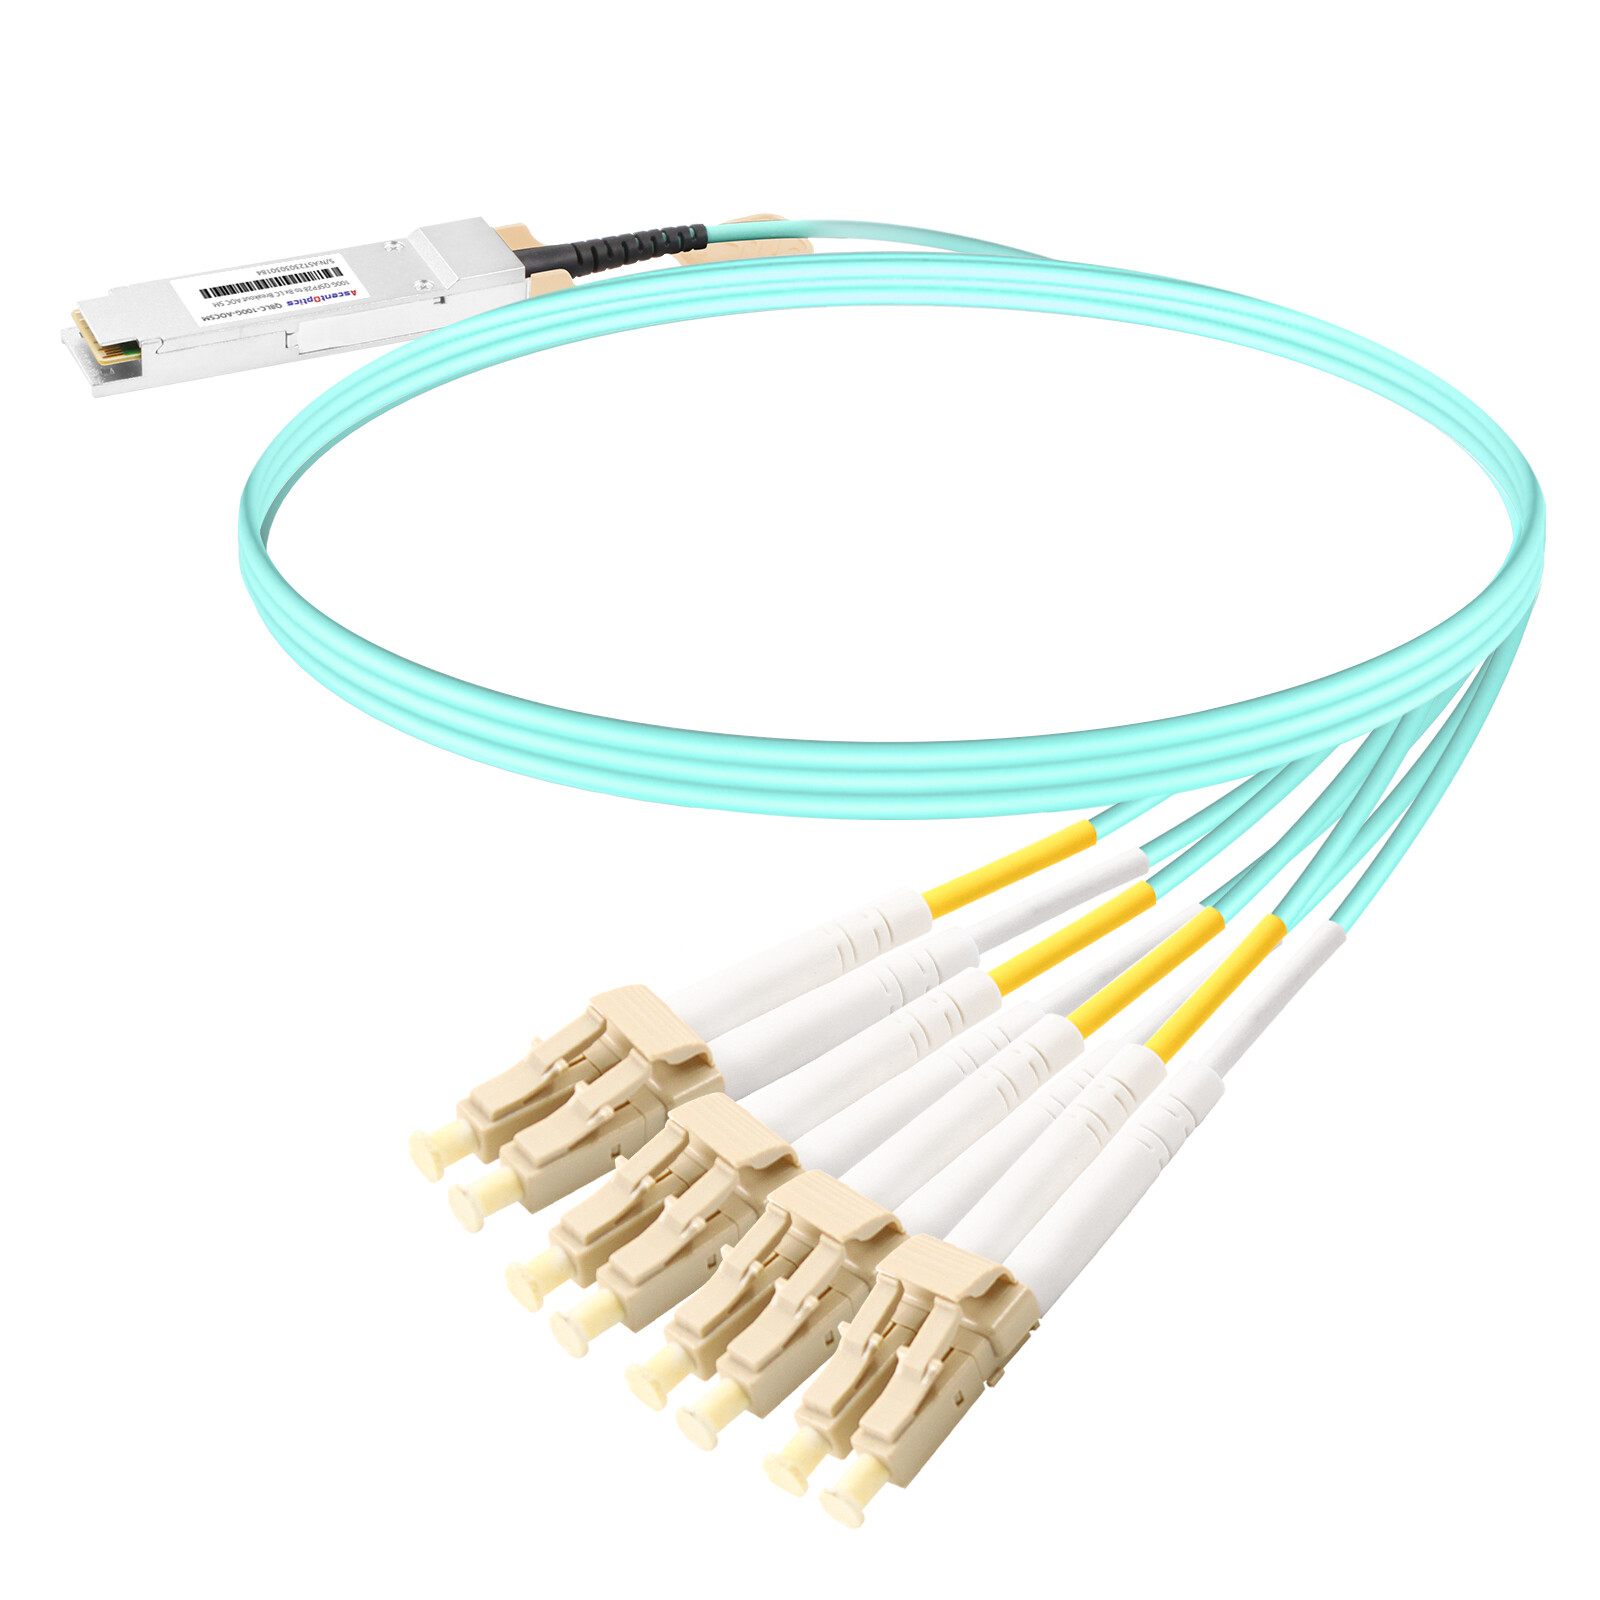 100G QSFP28 to 8x LC Breakout AOC Cable,5 Meters